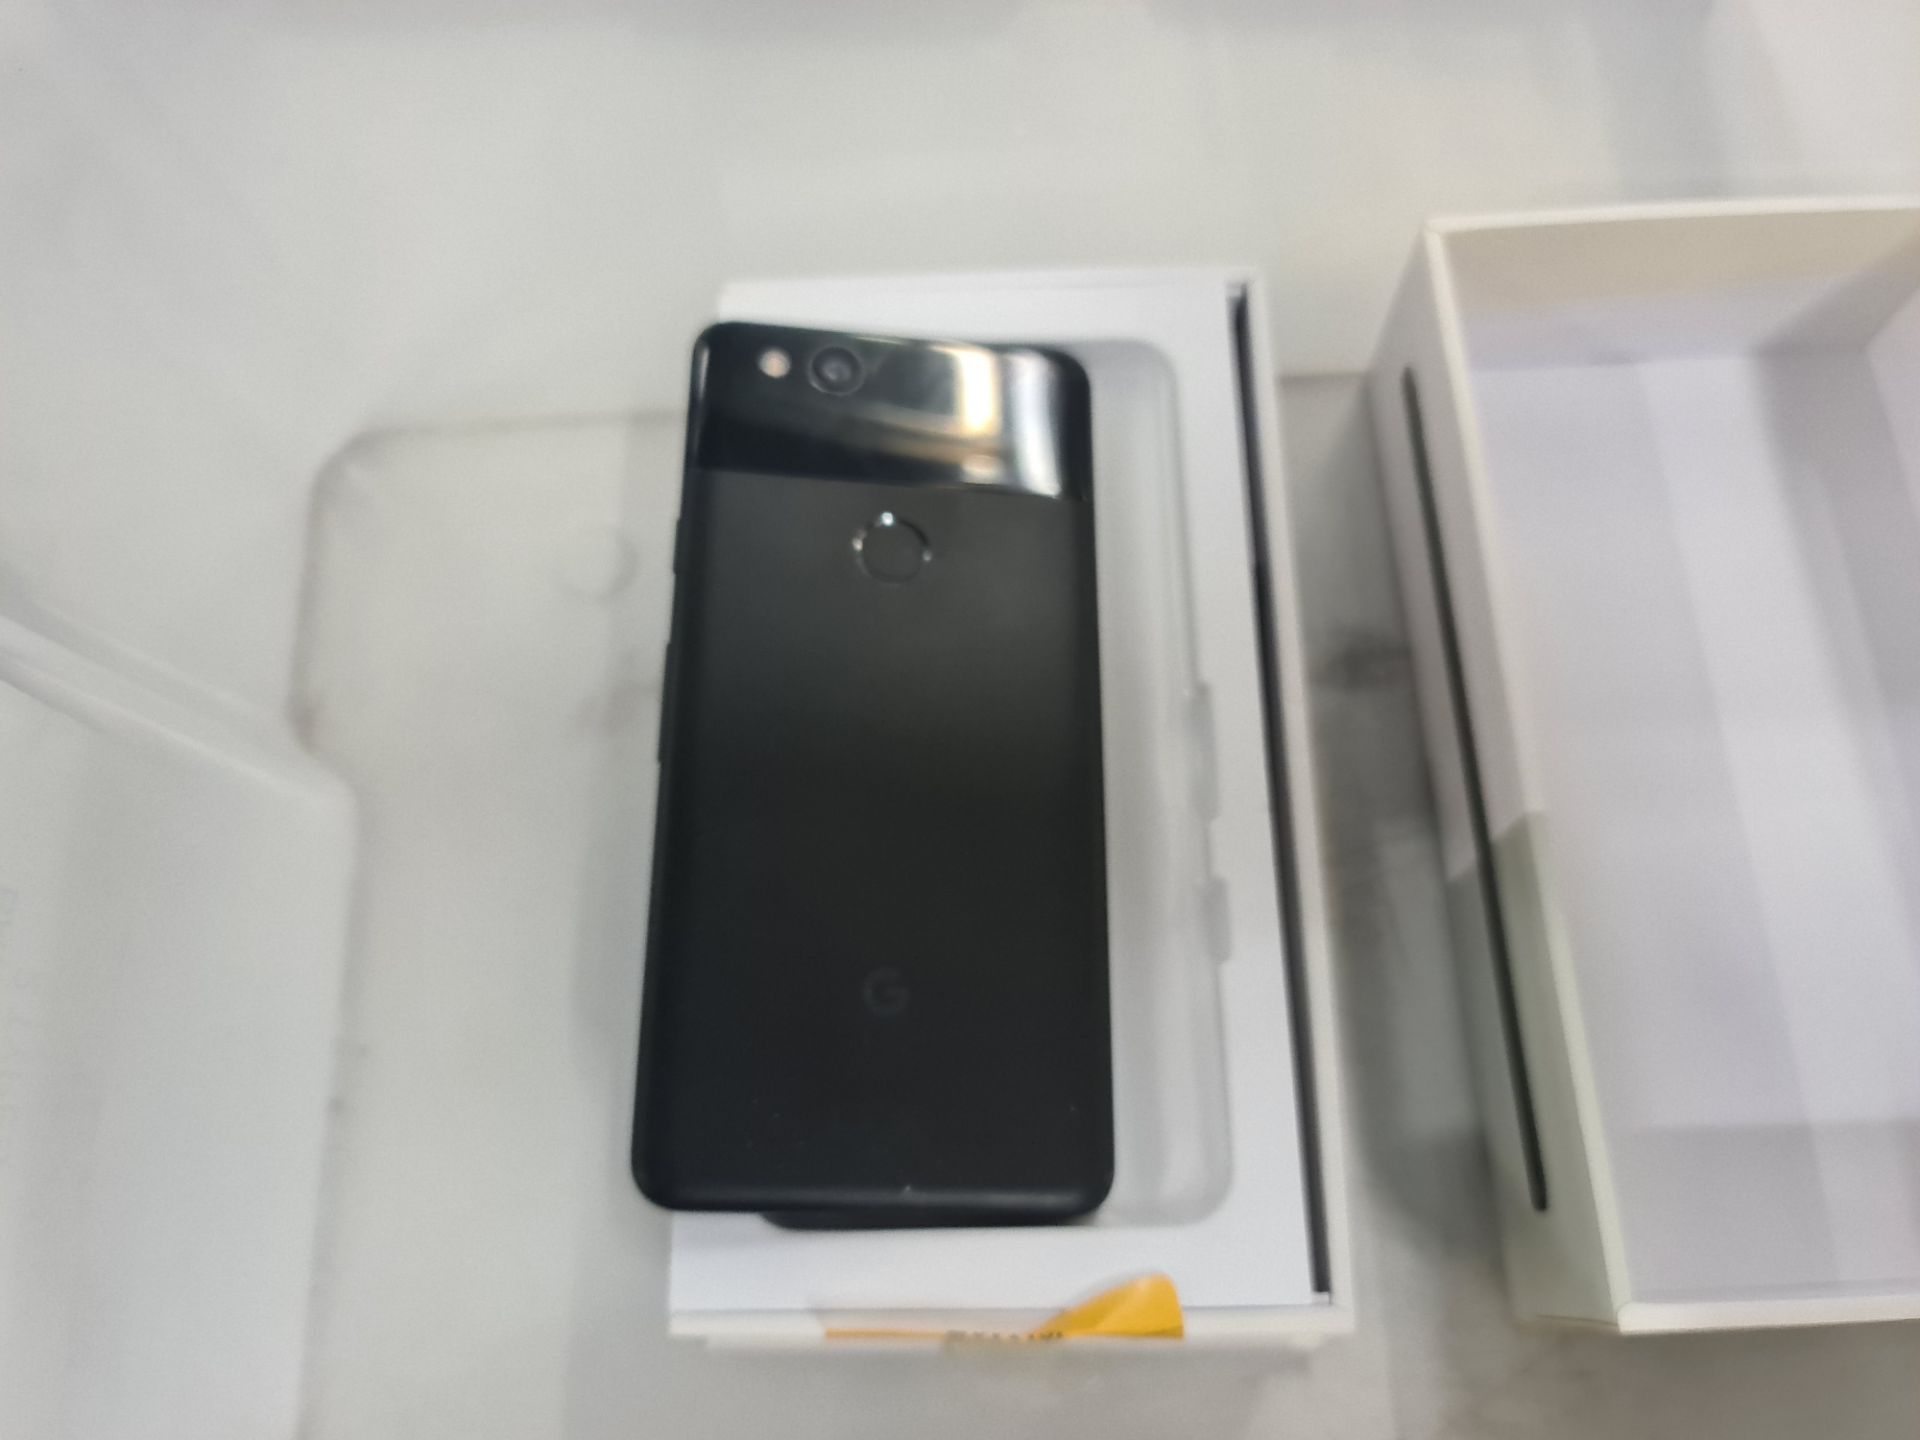 Google Pixel 2 mobile phone with box. - Image 9 of 11